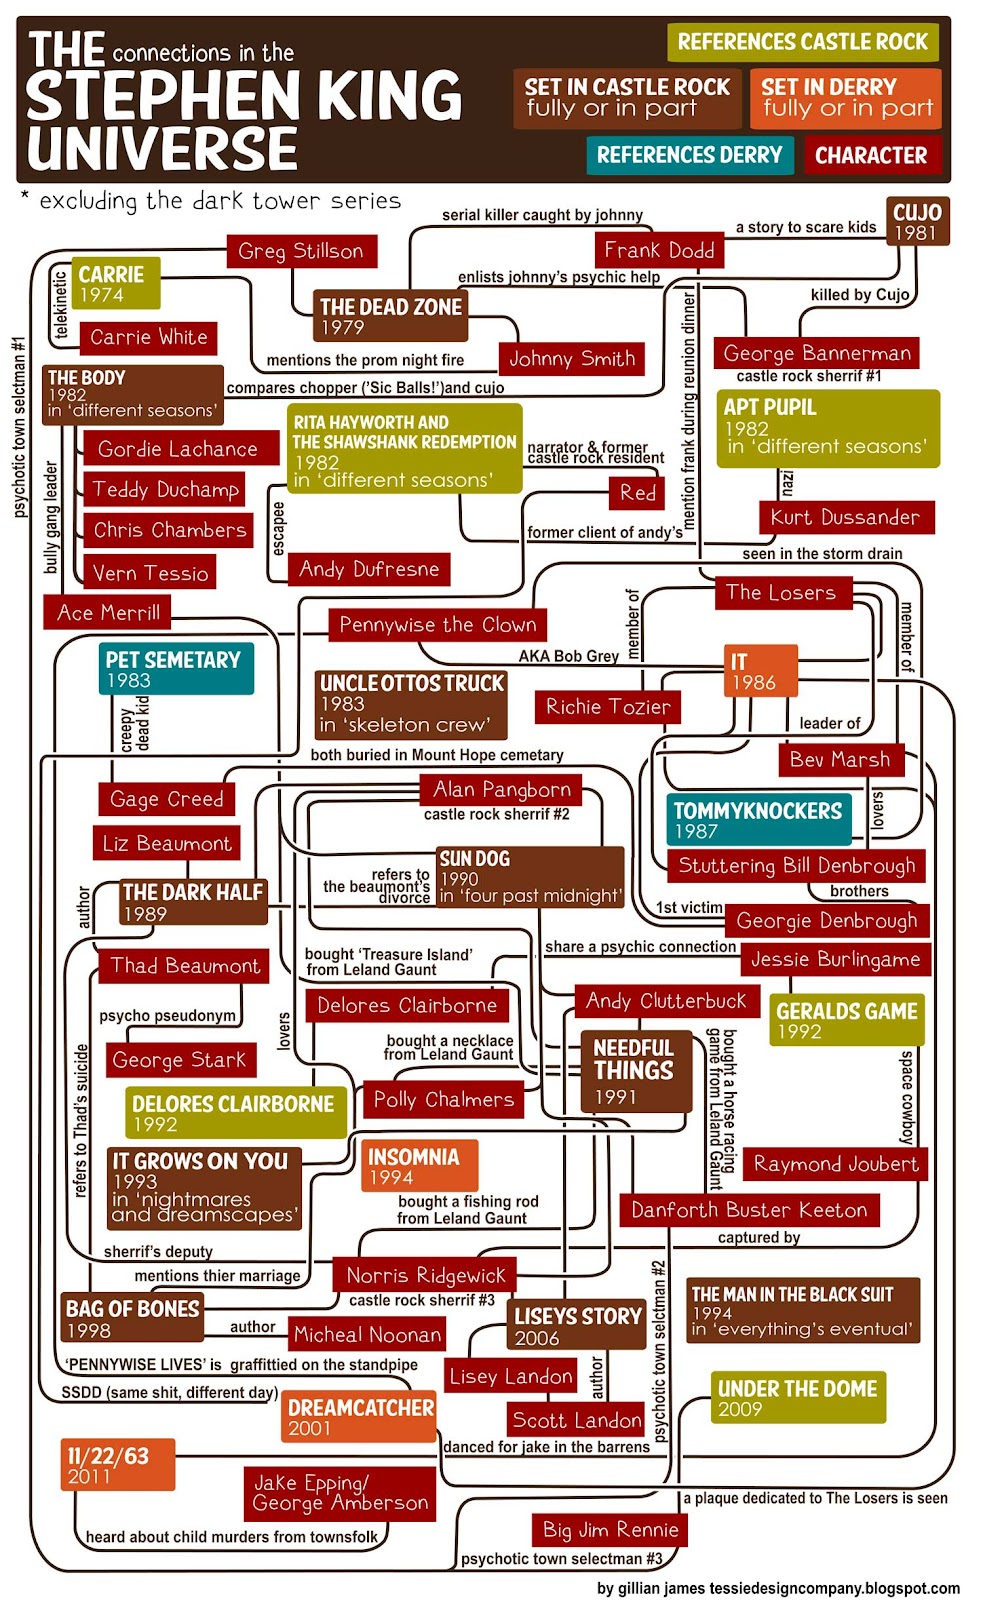 Crazy Flowchart shows Stephen King Universe Connections — GeekTyrant